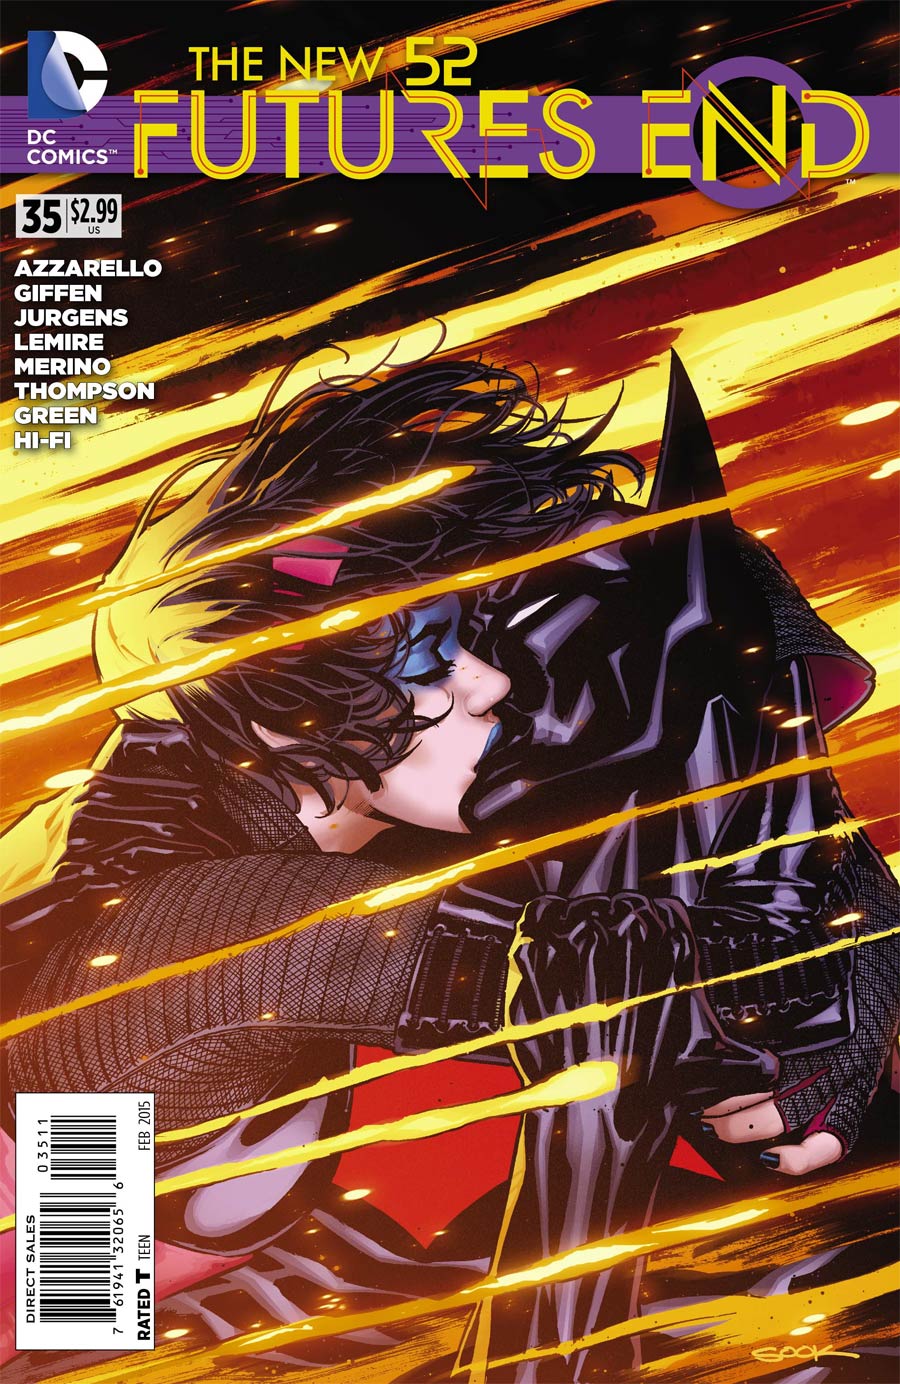 New 52 Futures End #35